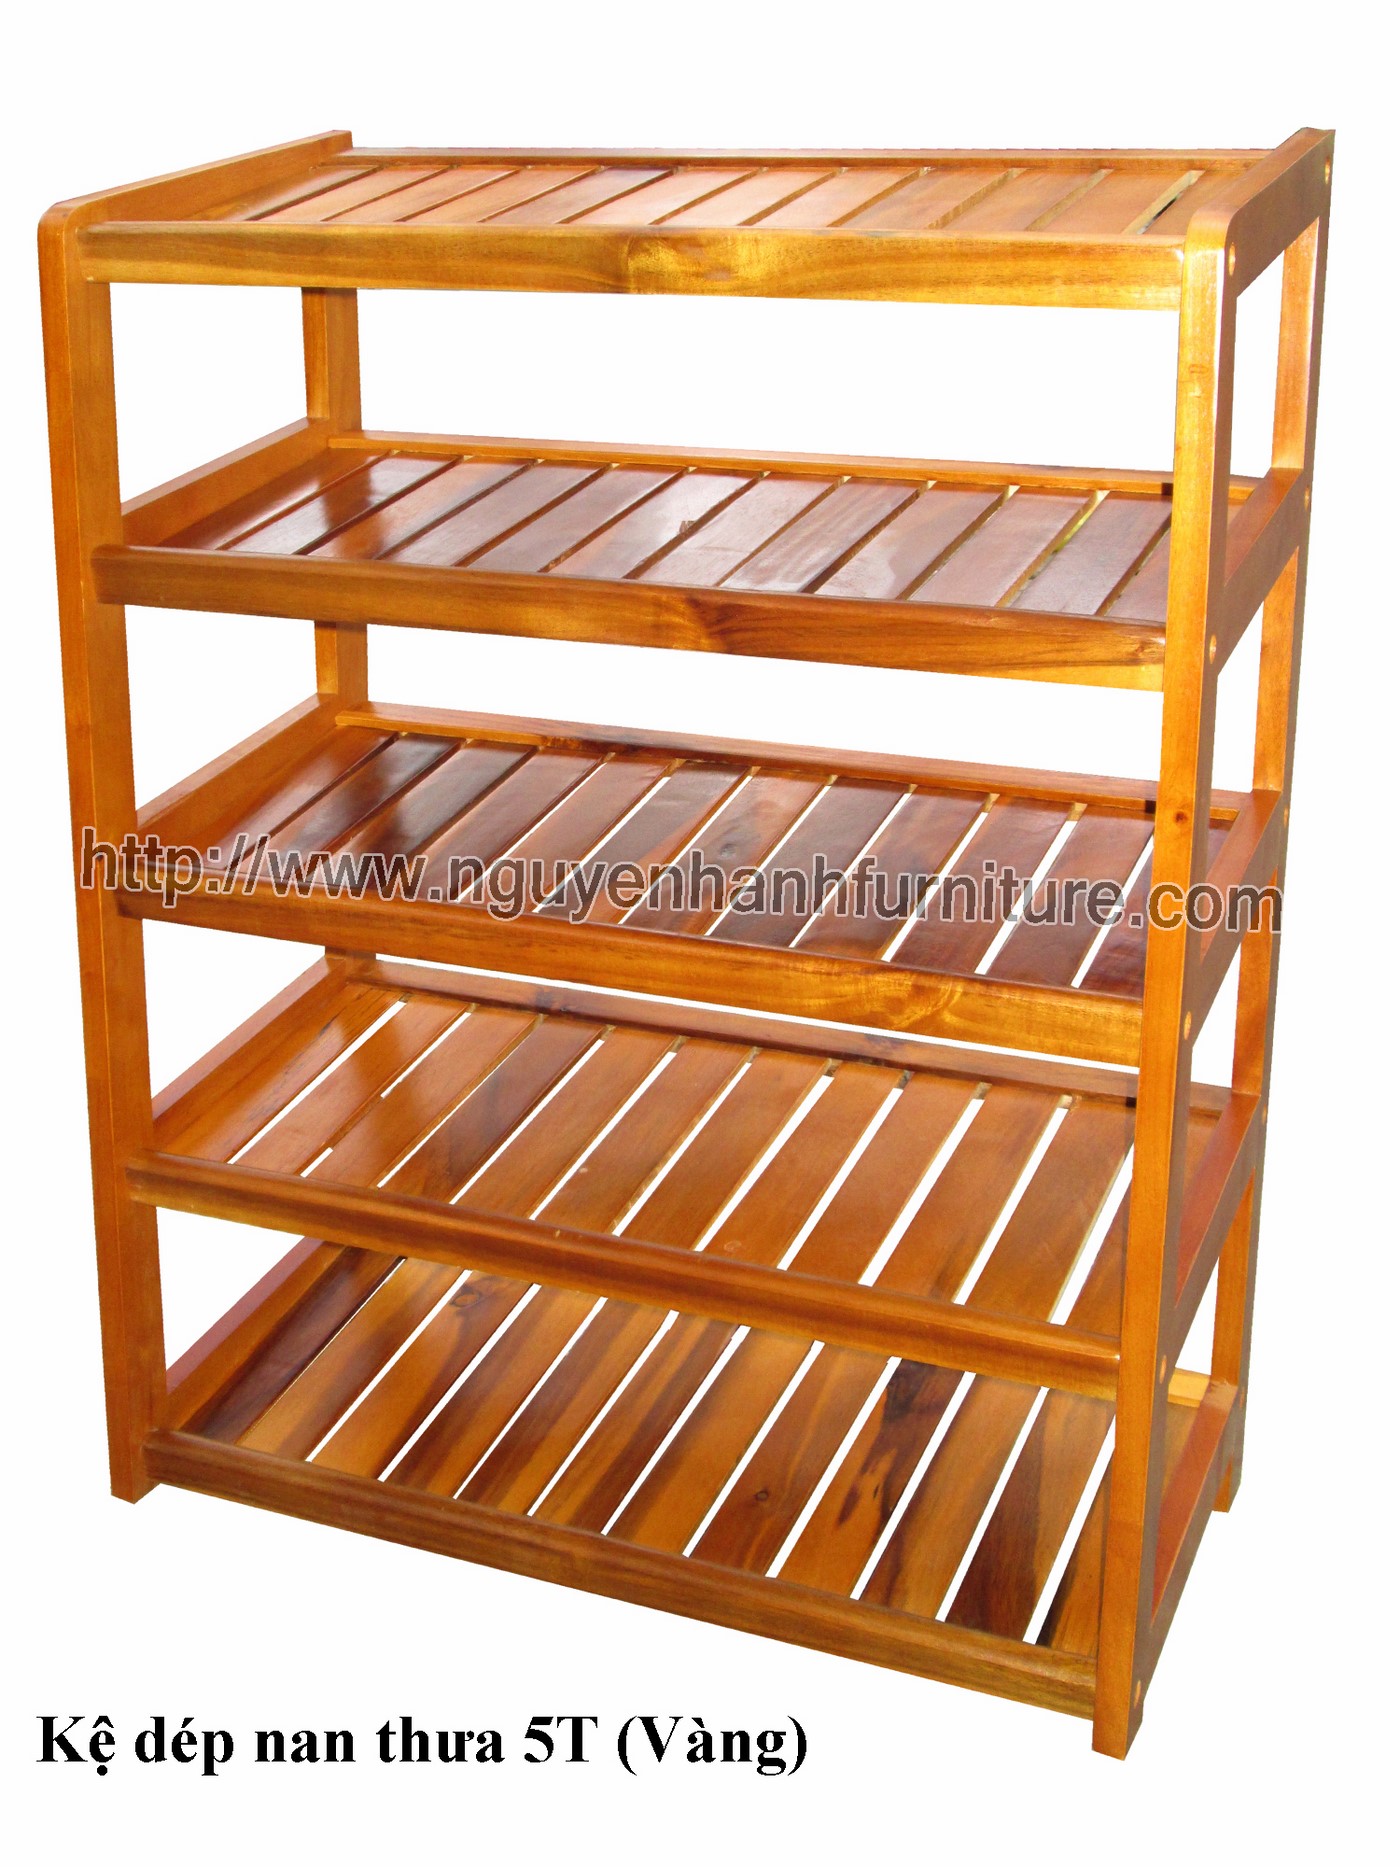 Name product: 5 storey Shoeshelf with sparse blades (Yellow)- Dimensions: 62 x 30 x 82 (H) - Description: Wood natural rubber